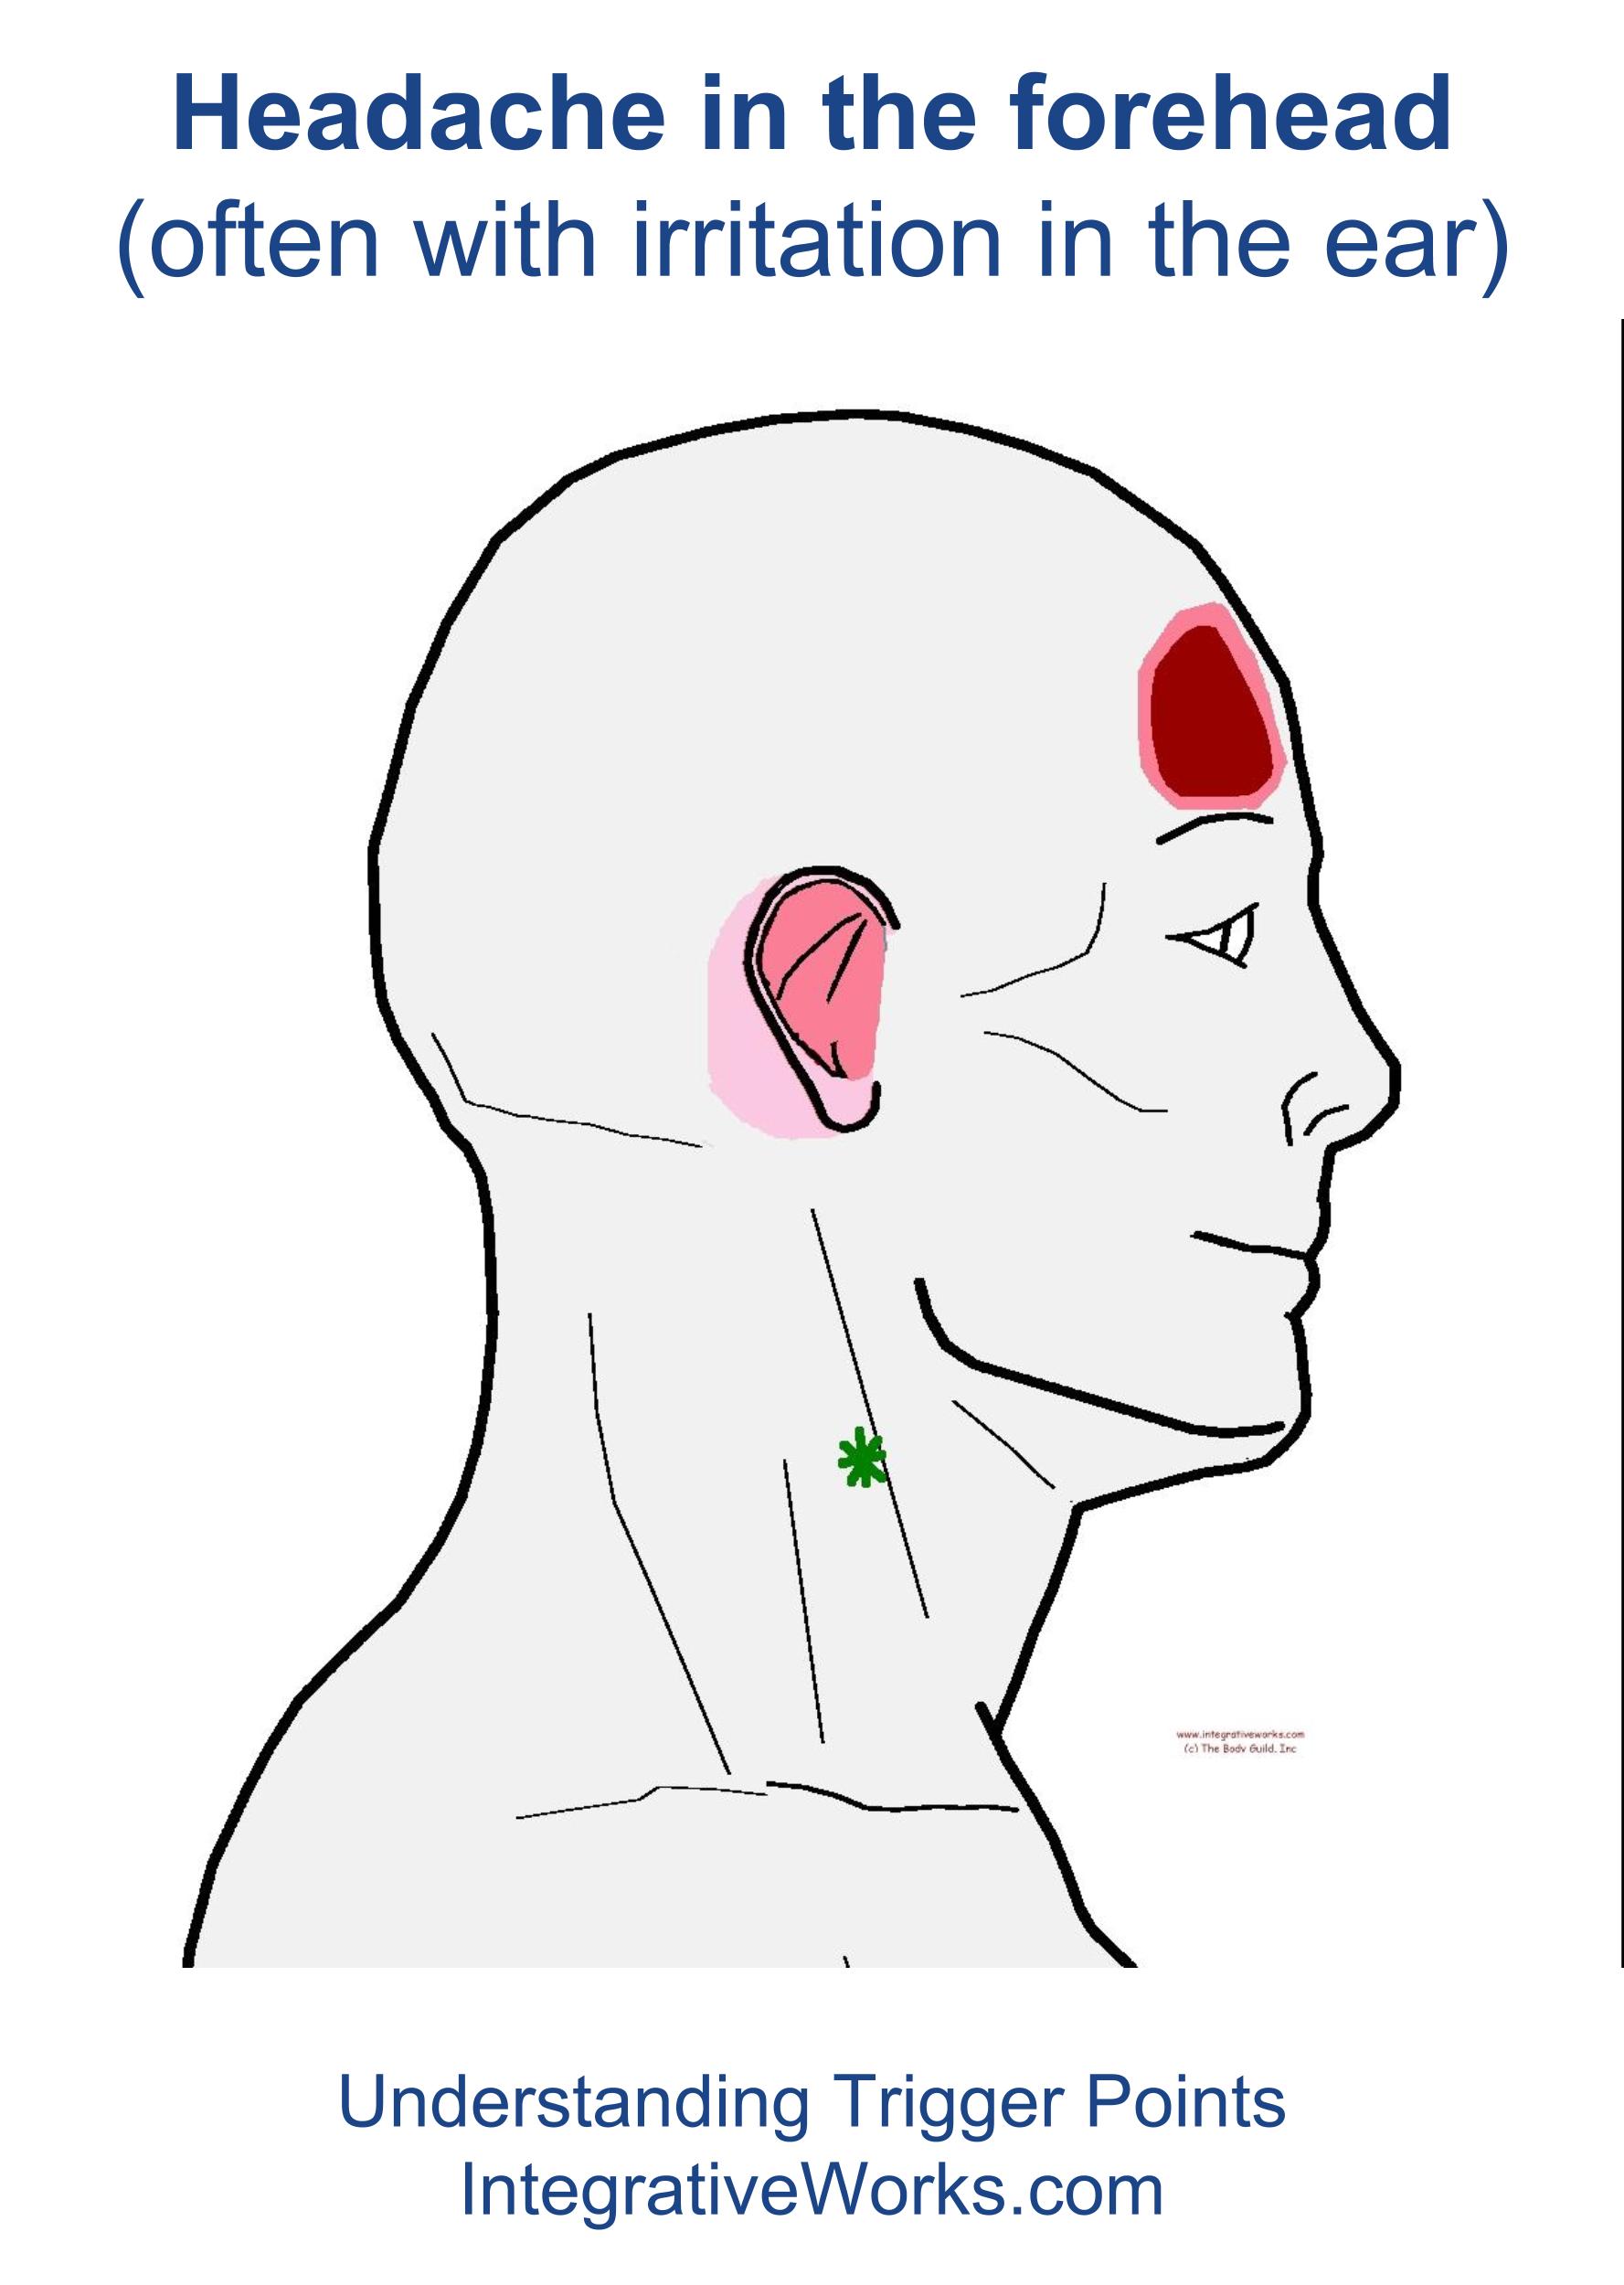 Trigger Points - Headache in the Forehead | Integrative Works